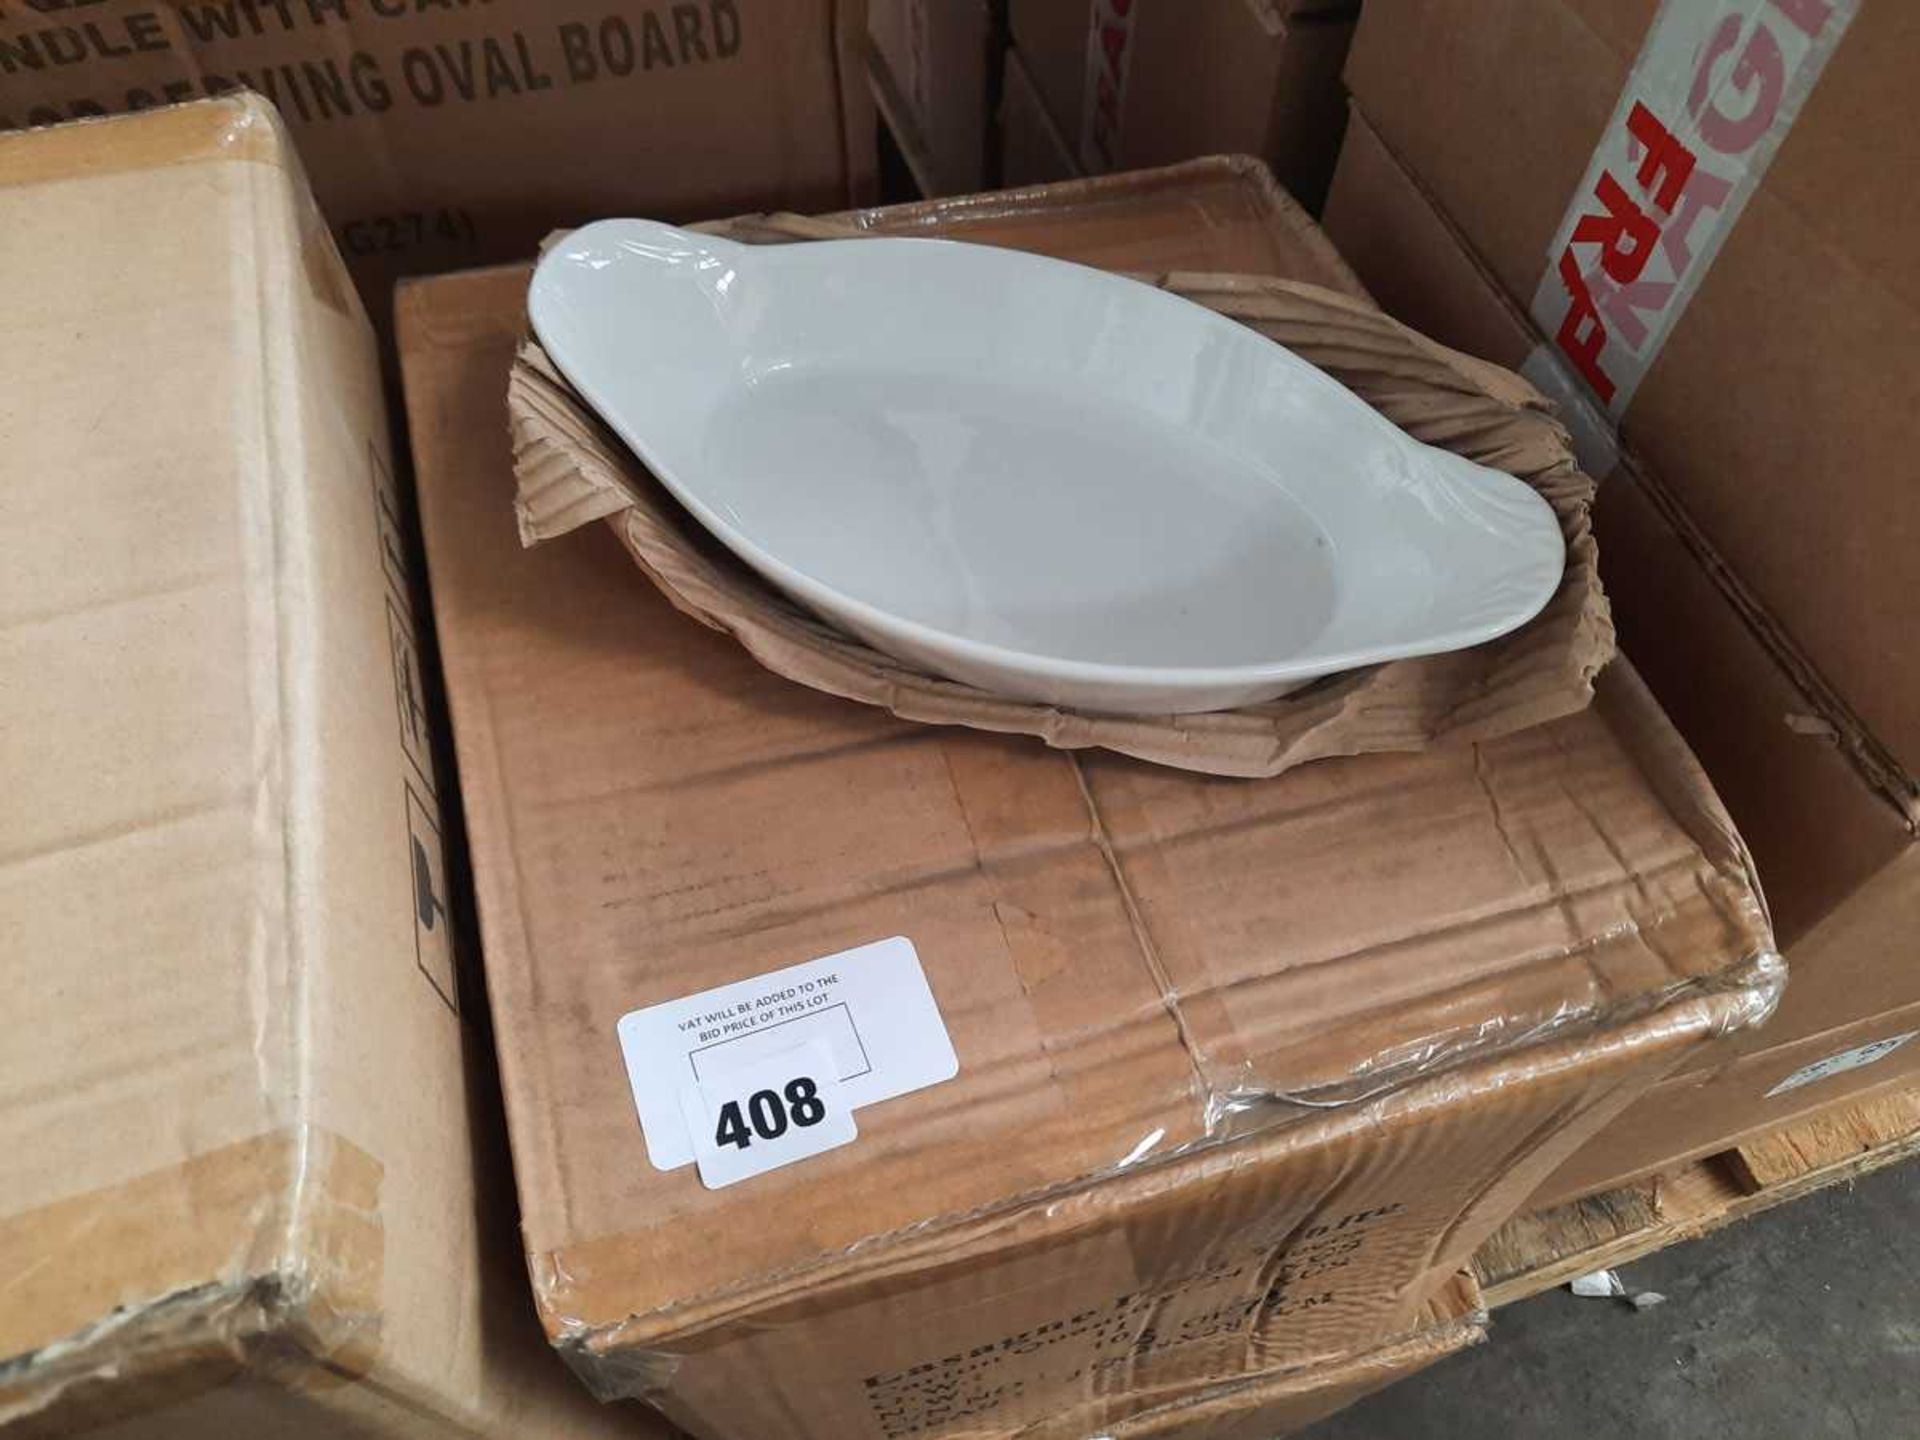 +VAT 2 x boxes of 24 lasagne dishes 25cm (48 in total)